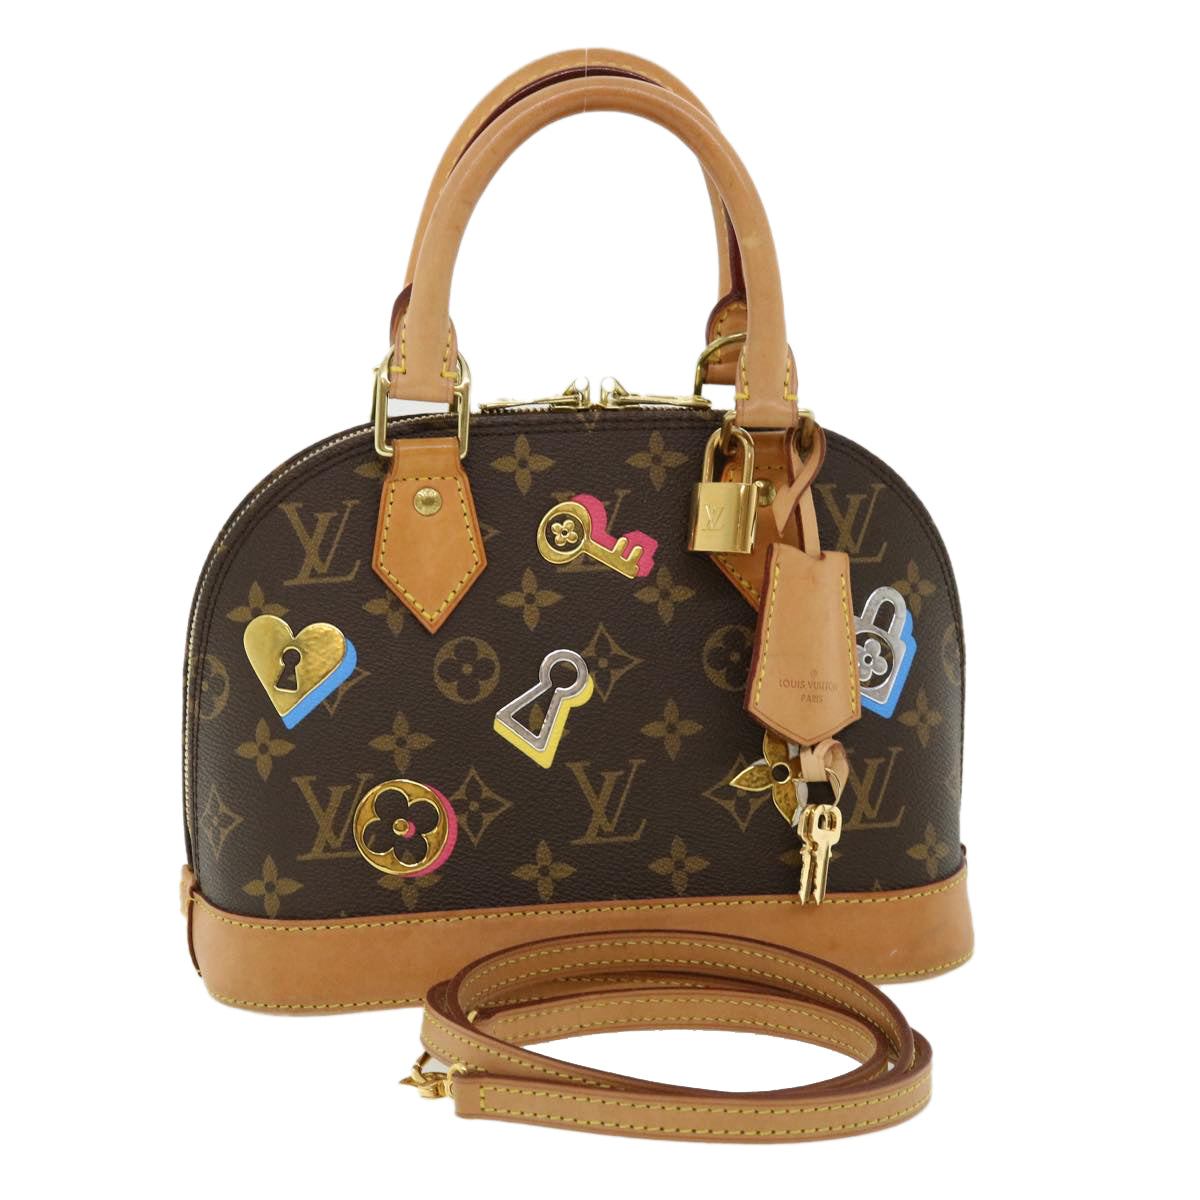 Products by Louis Vuitton: Alma BB